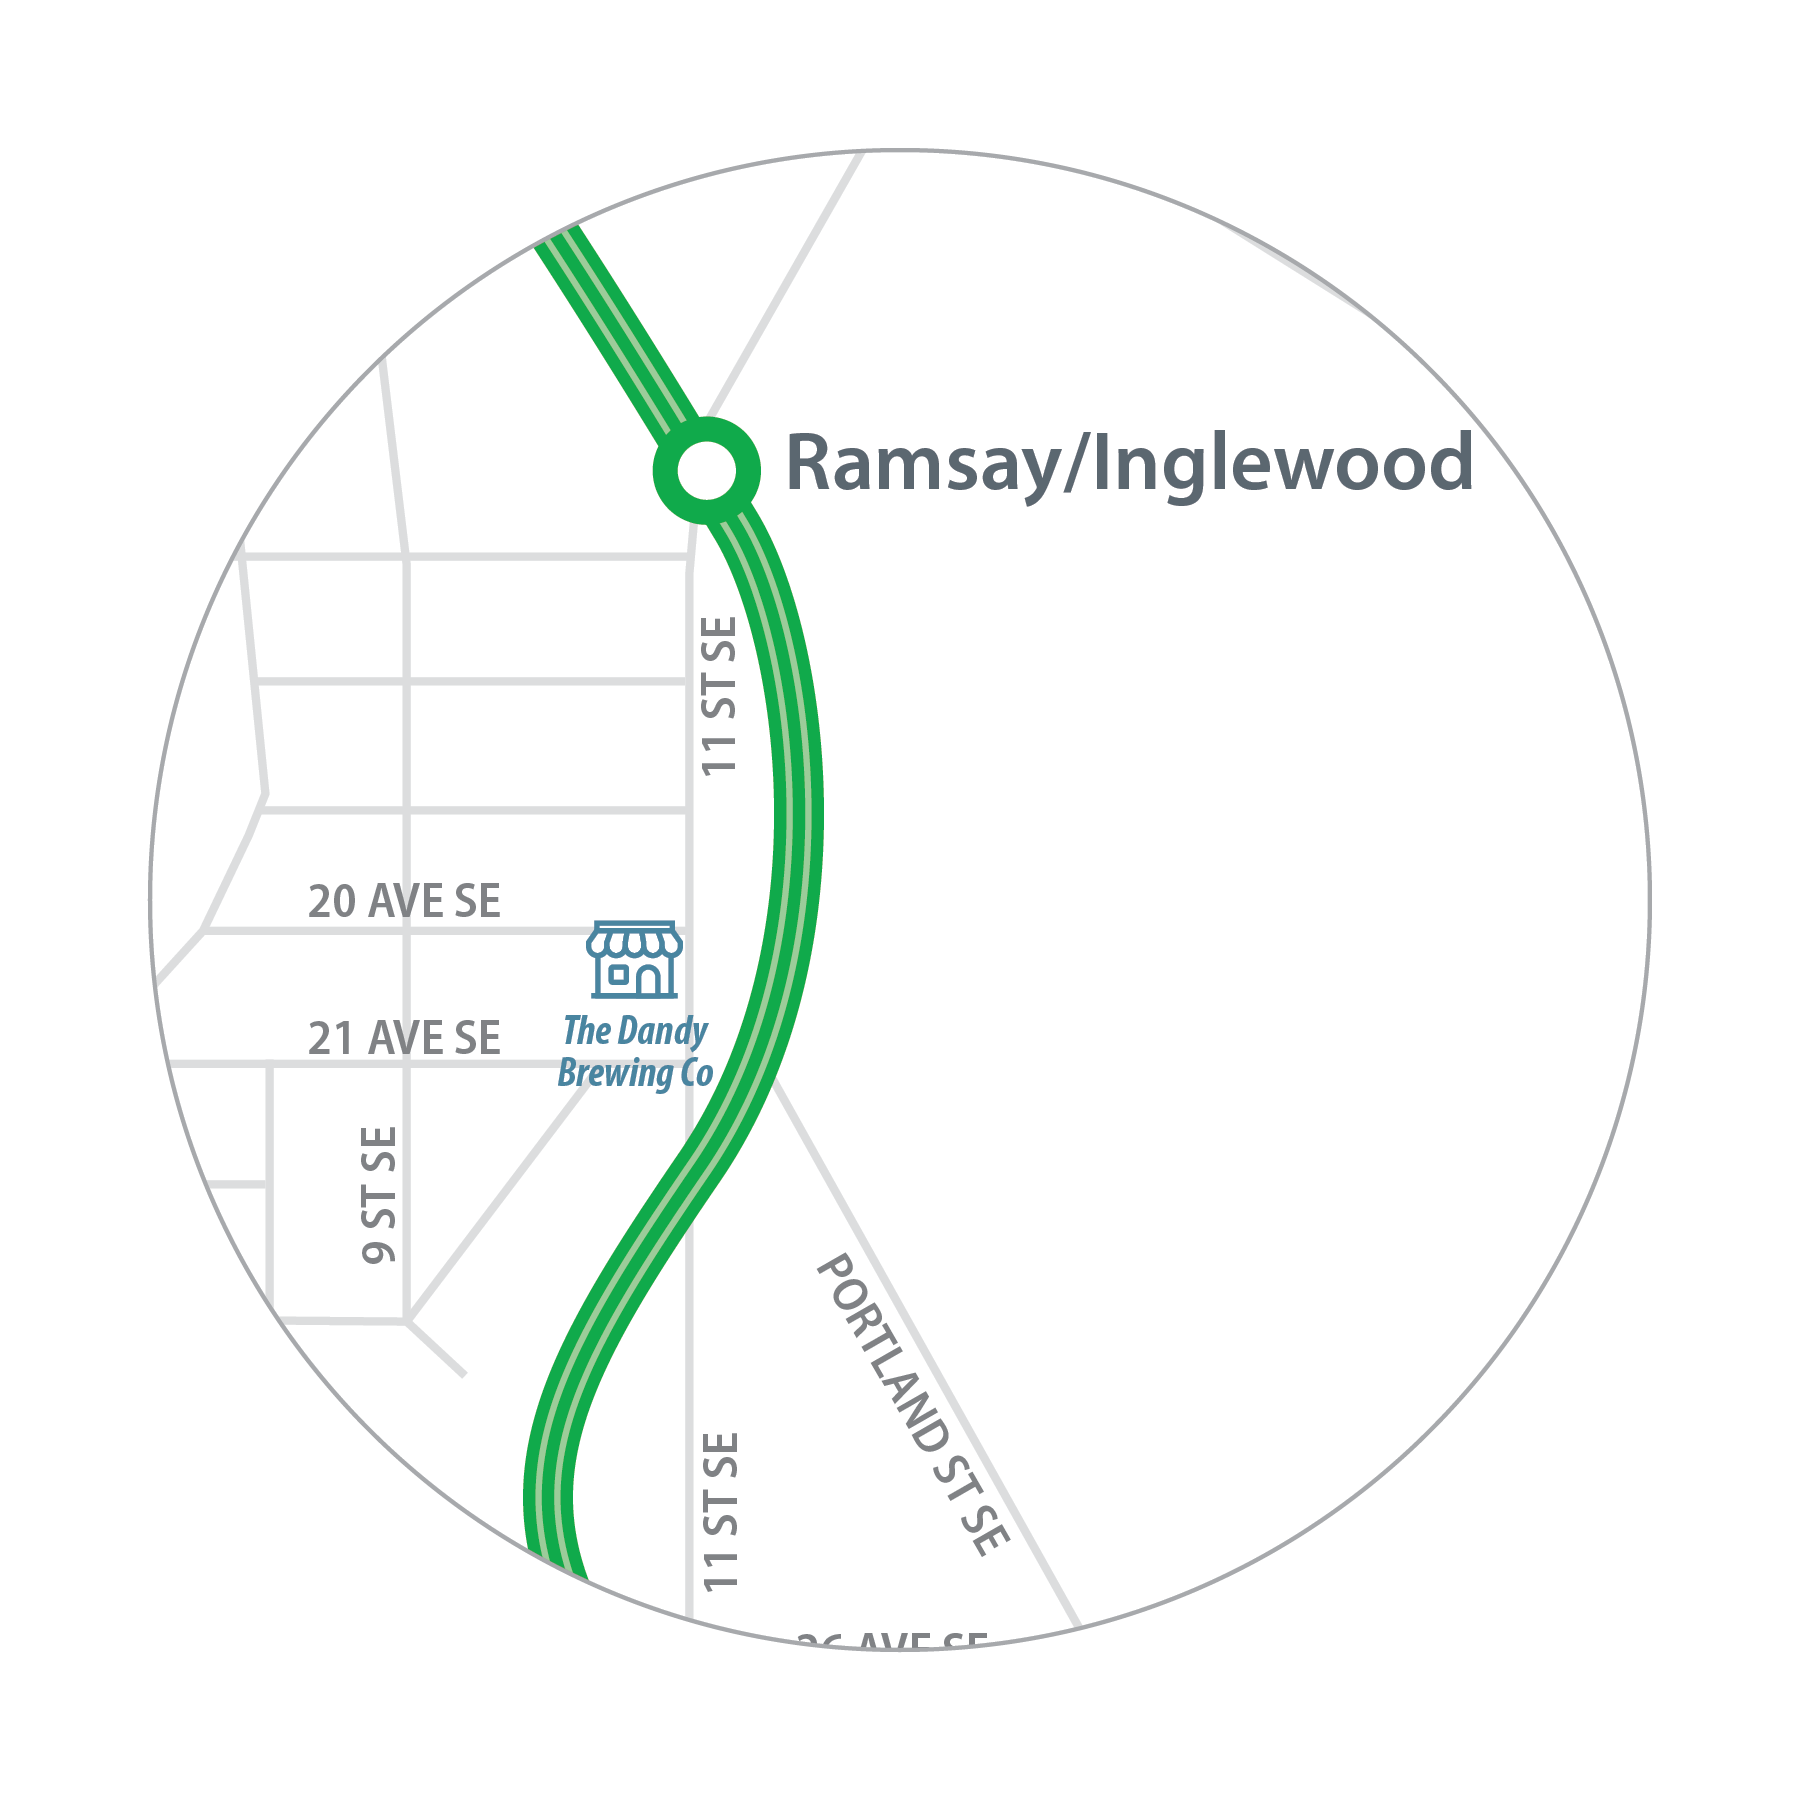 Map of Dandy Brewing Co. location in relation to Ramsay/Inglewood Station.